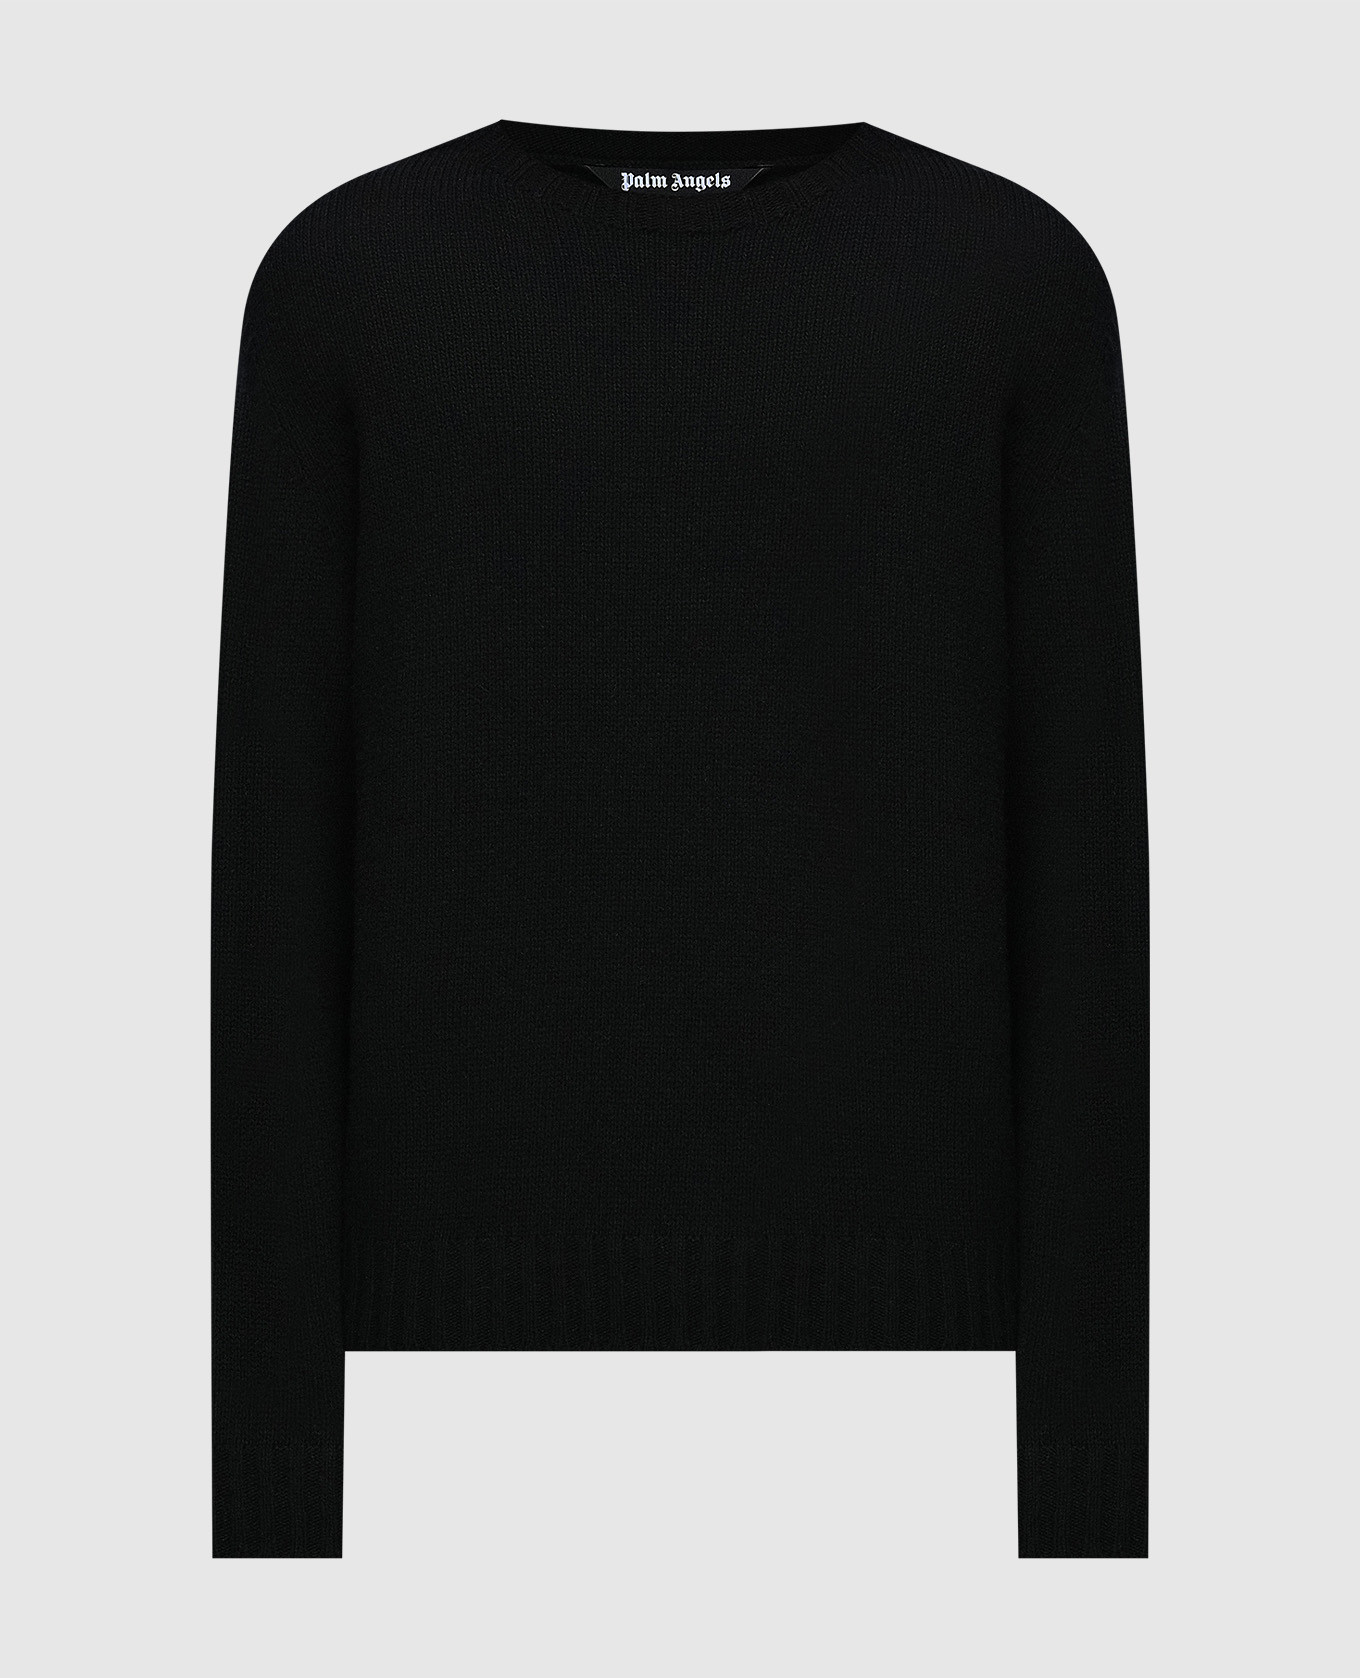 Black wool sweater with logo embroidery